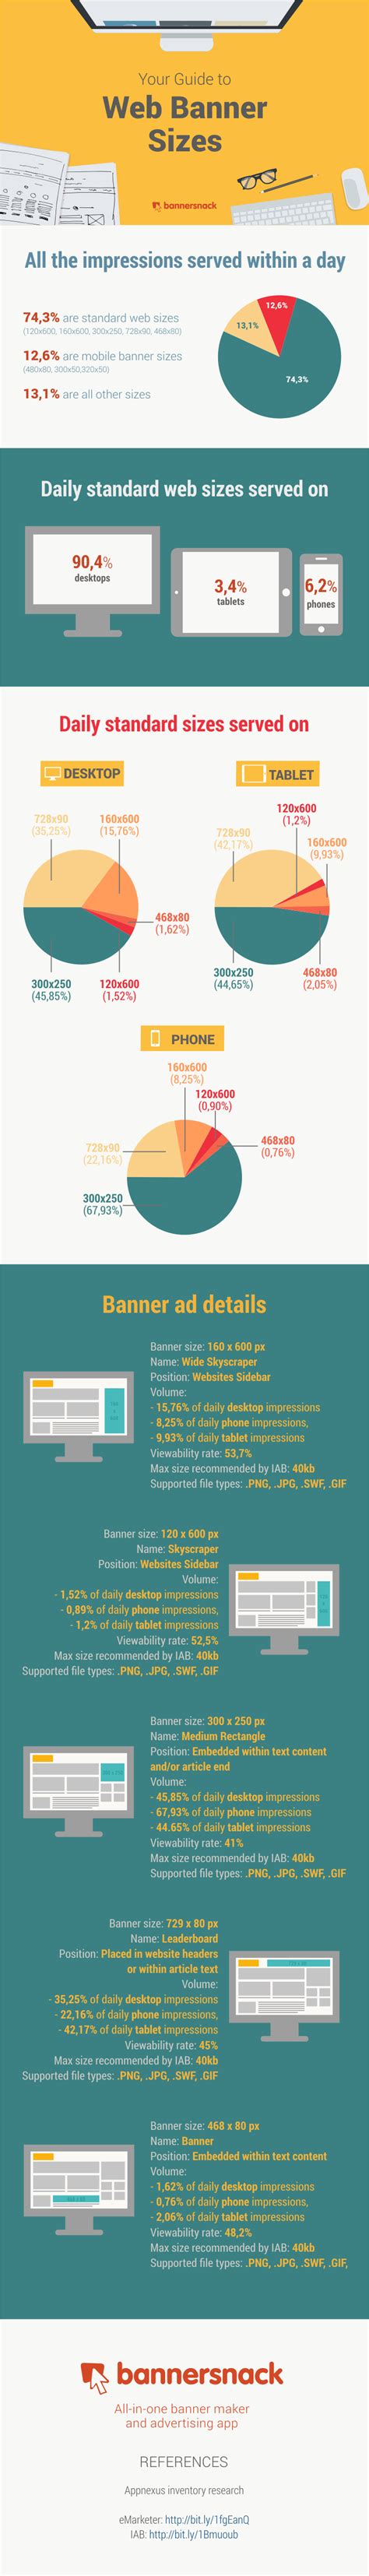 The 300x600 is one of the fastest growing sizes by impressions and is indicative of a trend where publishers are offering more visually impactful ad sizes that are preferred by brand advertisers. Infographic: Guide to Web Banner Ad Sizes